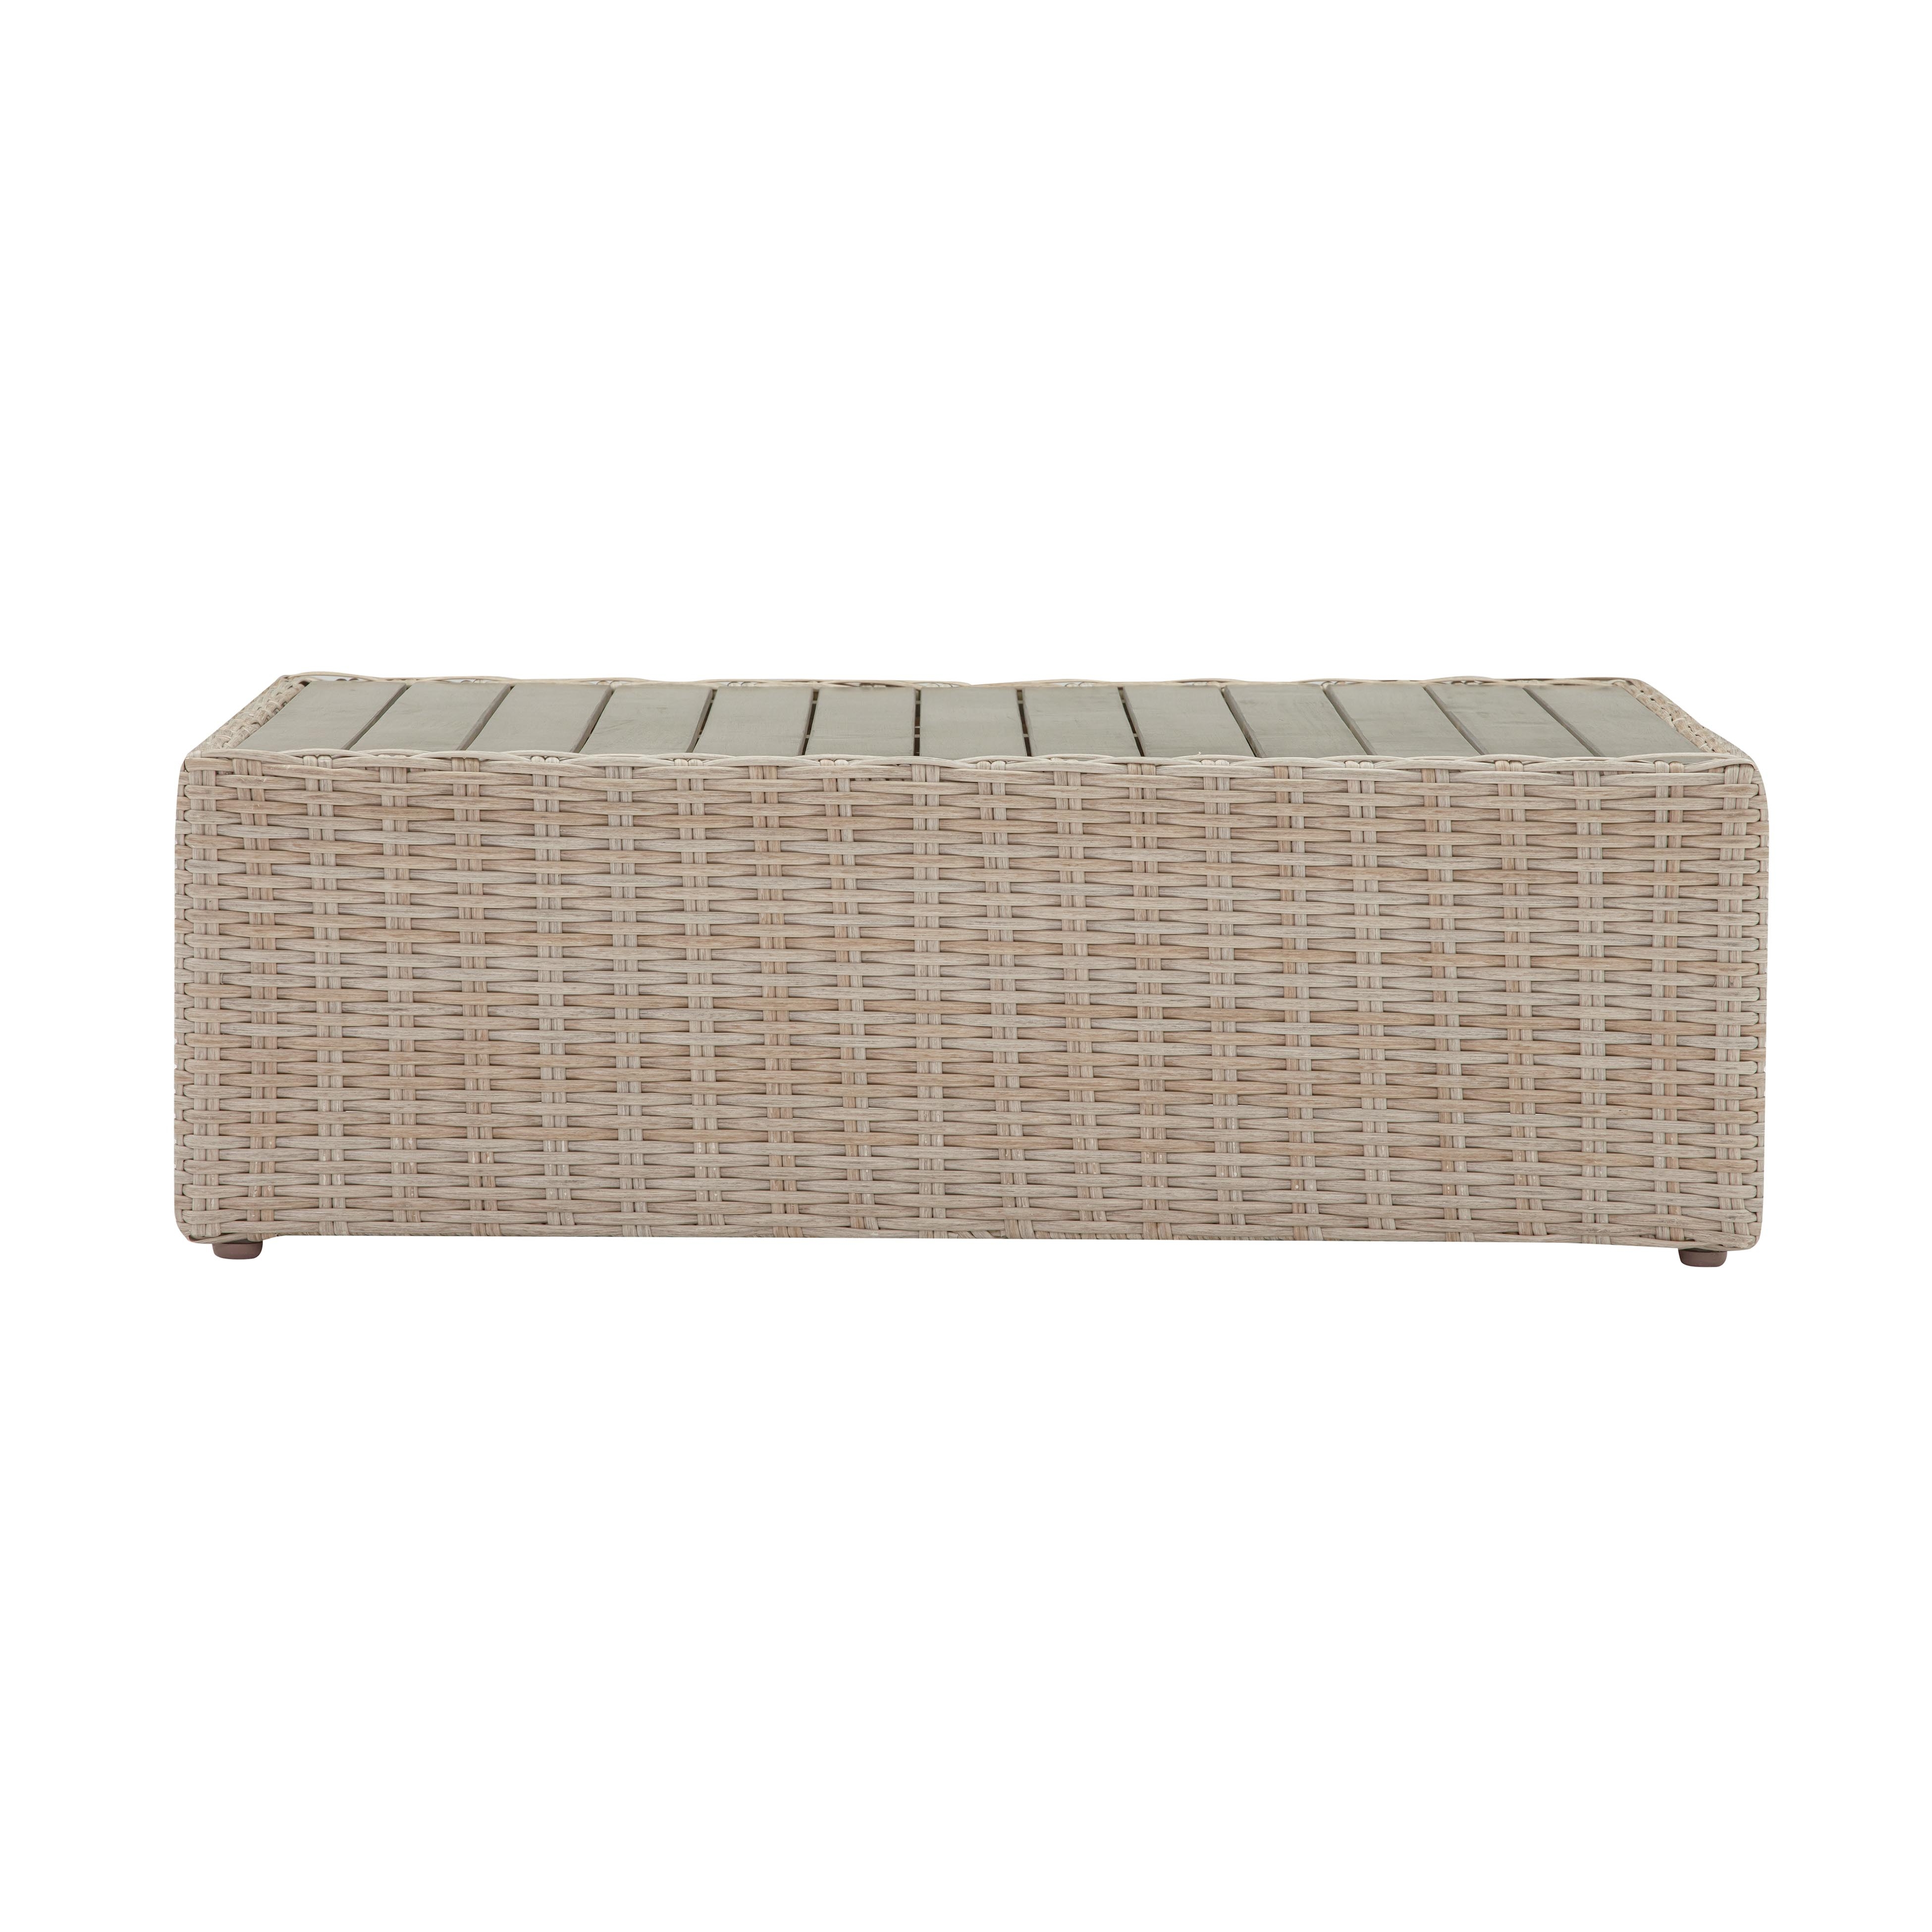 Cali Natural Wicker Outdoor Ottoman - Image 4